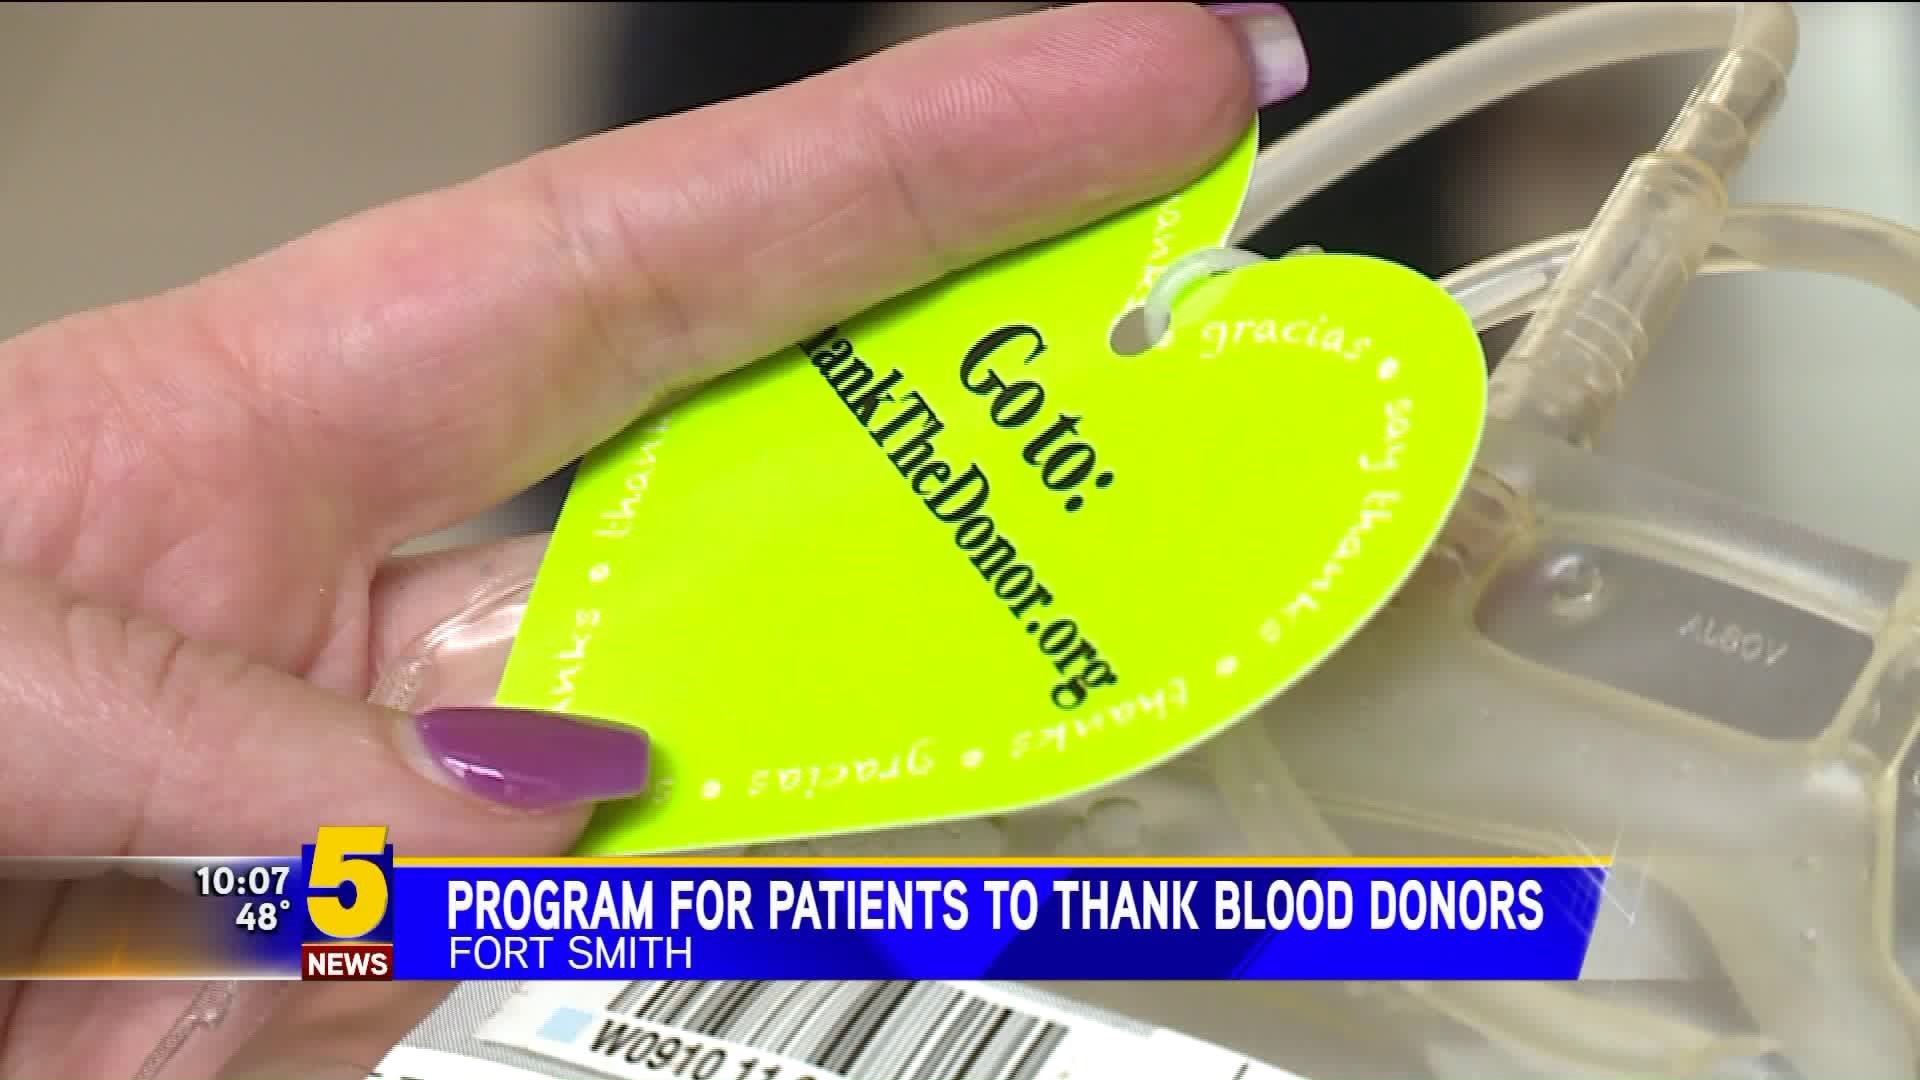 Program for Patients to Thank Blood Donors